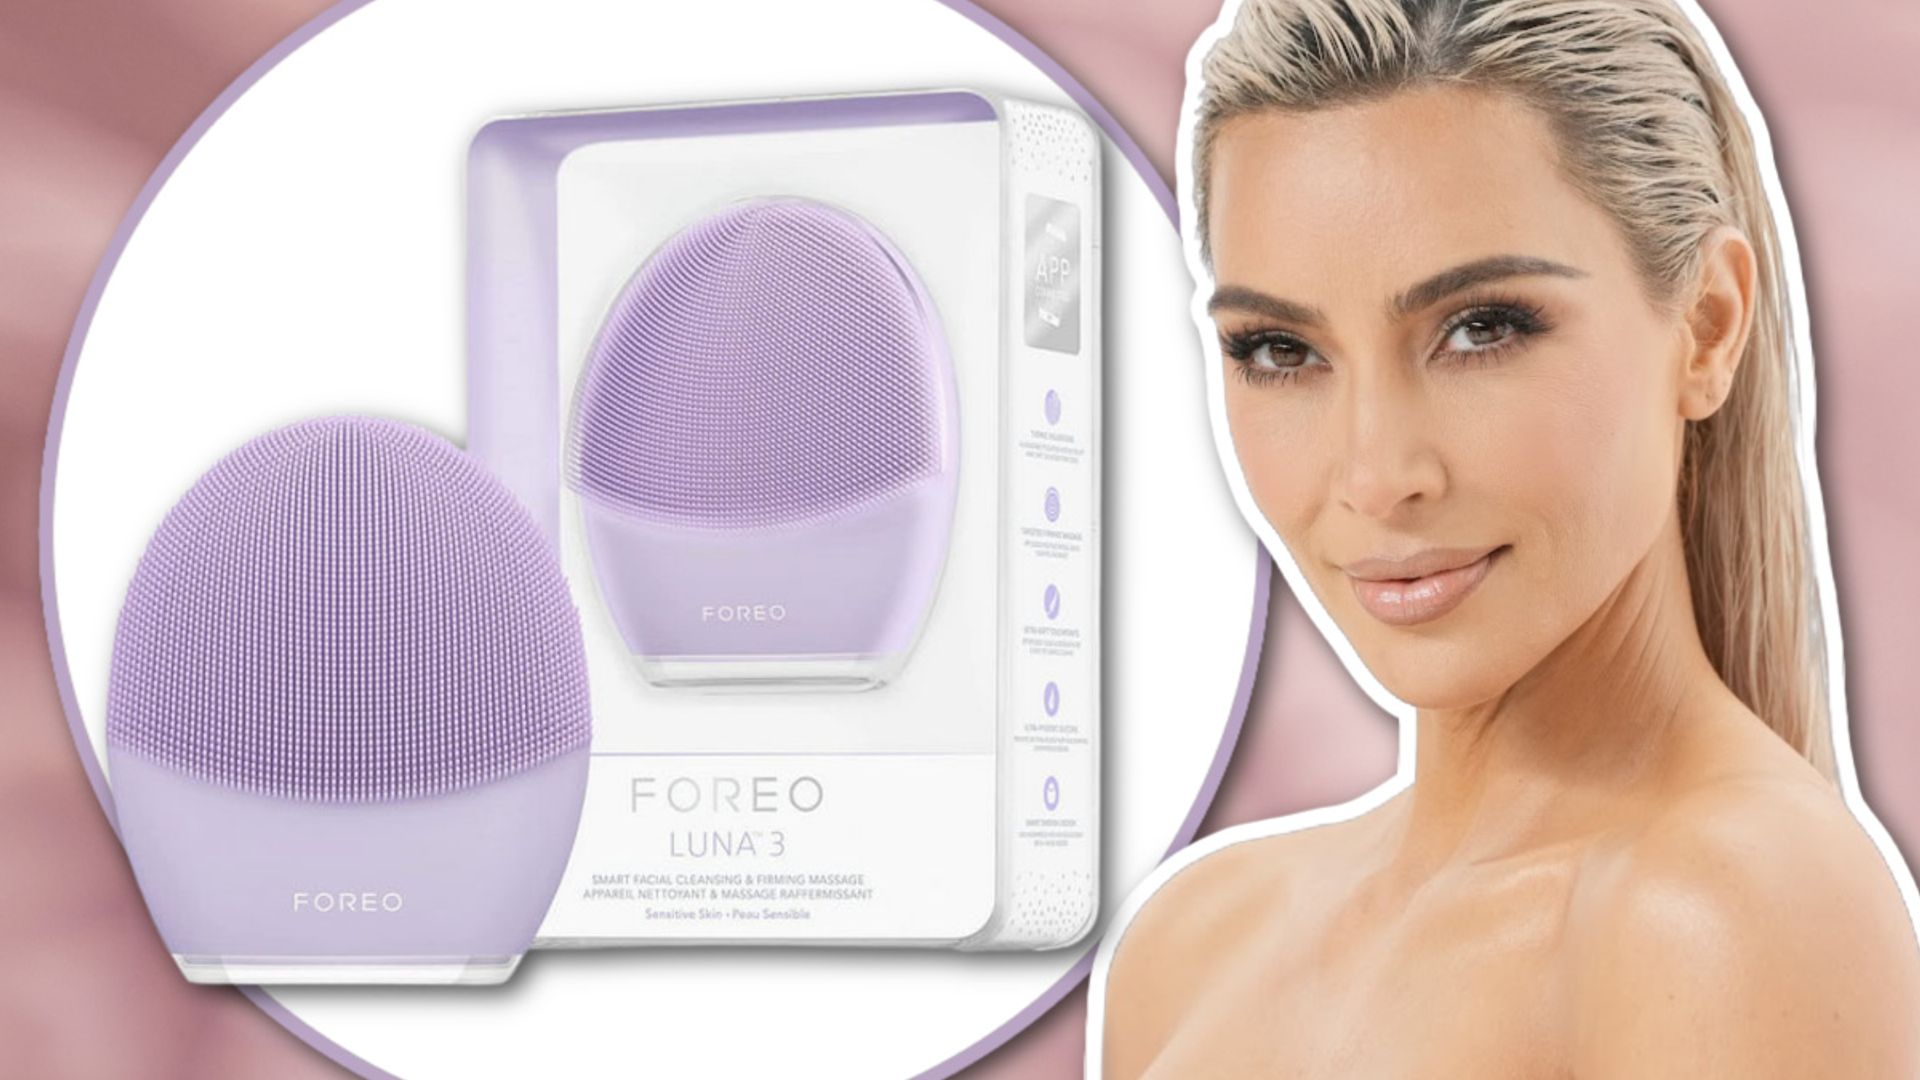 Kim Kardashian’s fave Foreo skincare gadget is in the Amazon sale